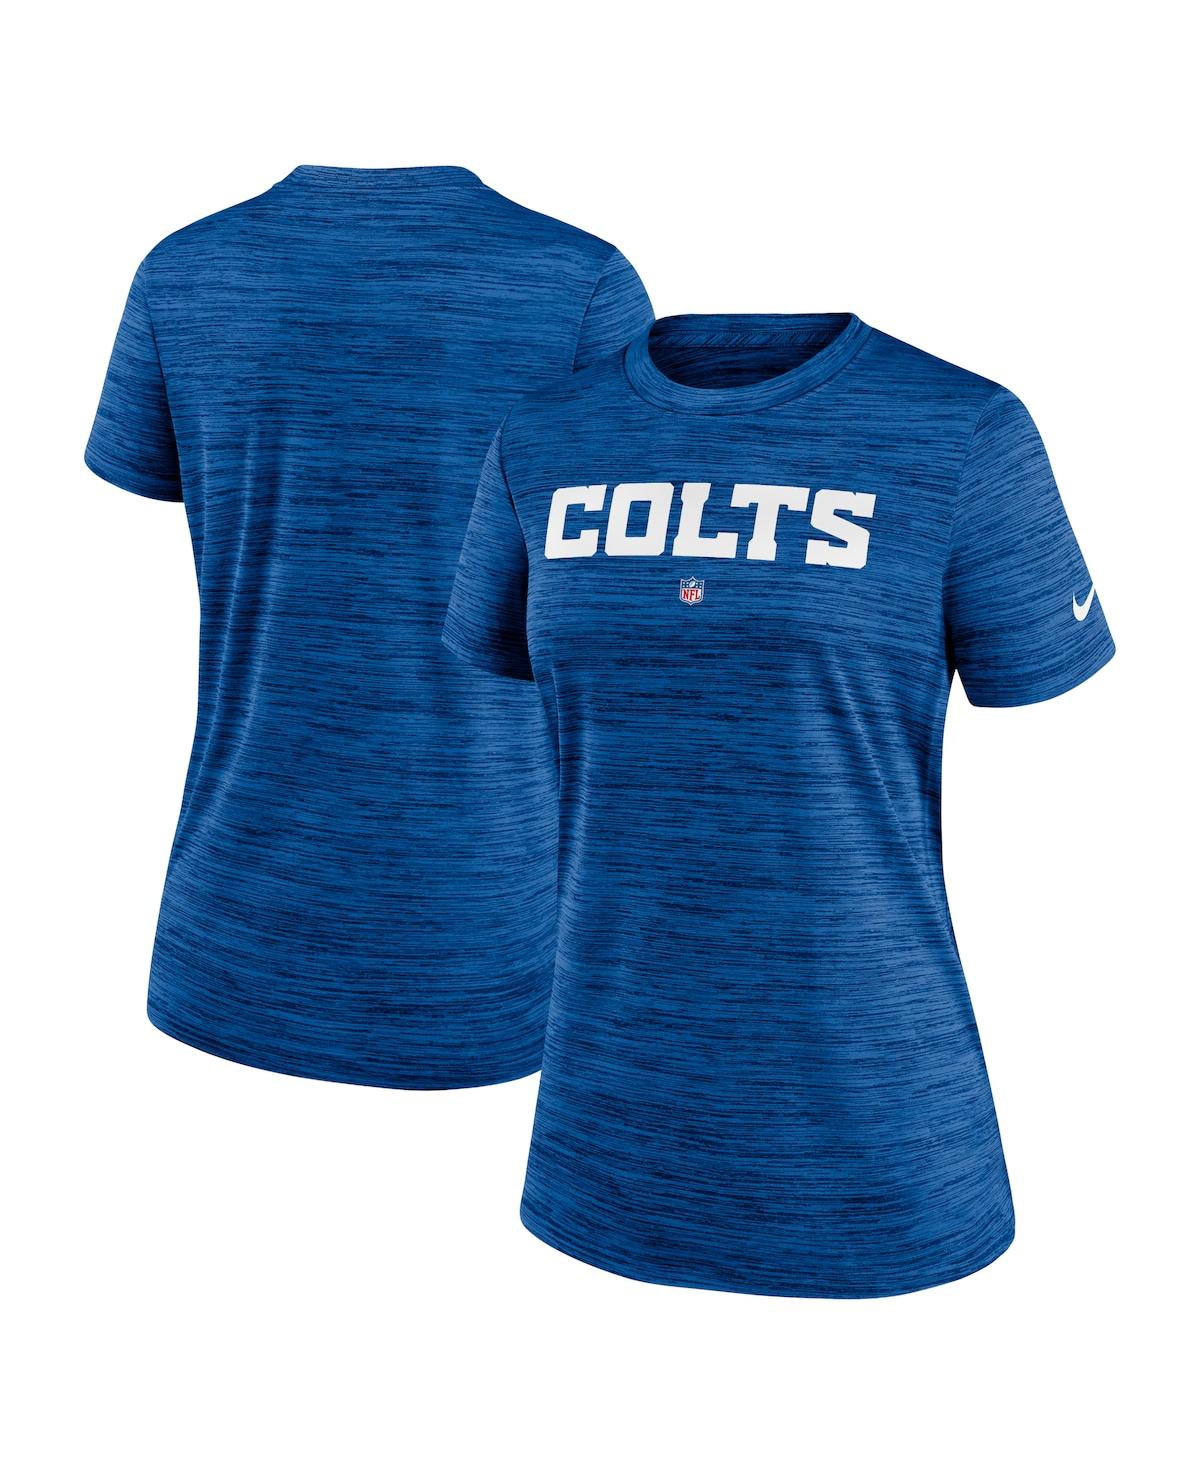 Nike Women's  Royal Indianapolis Colts Sideline Velocity Performance T-shirt